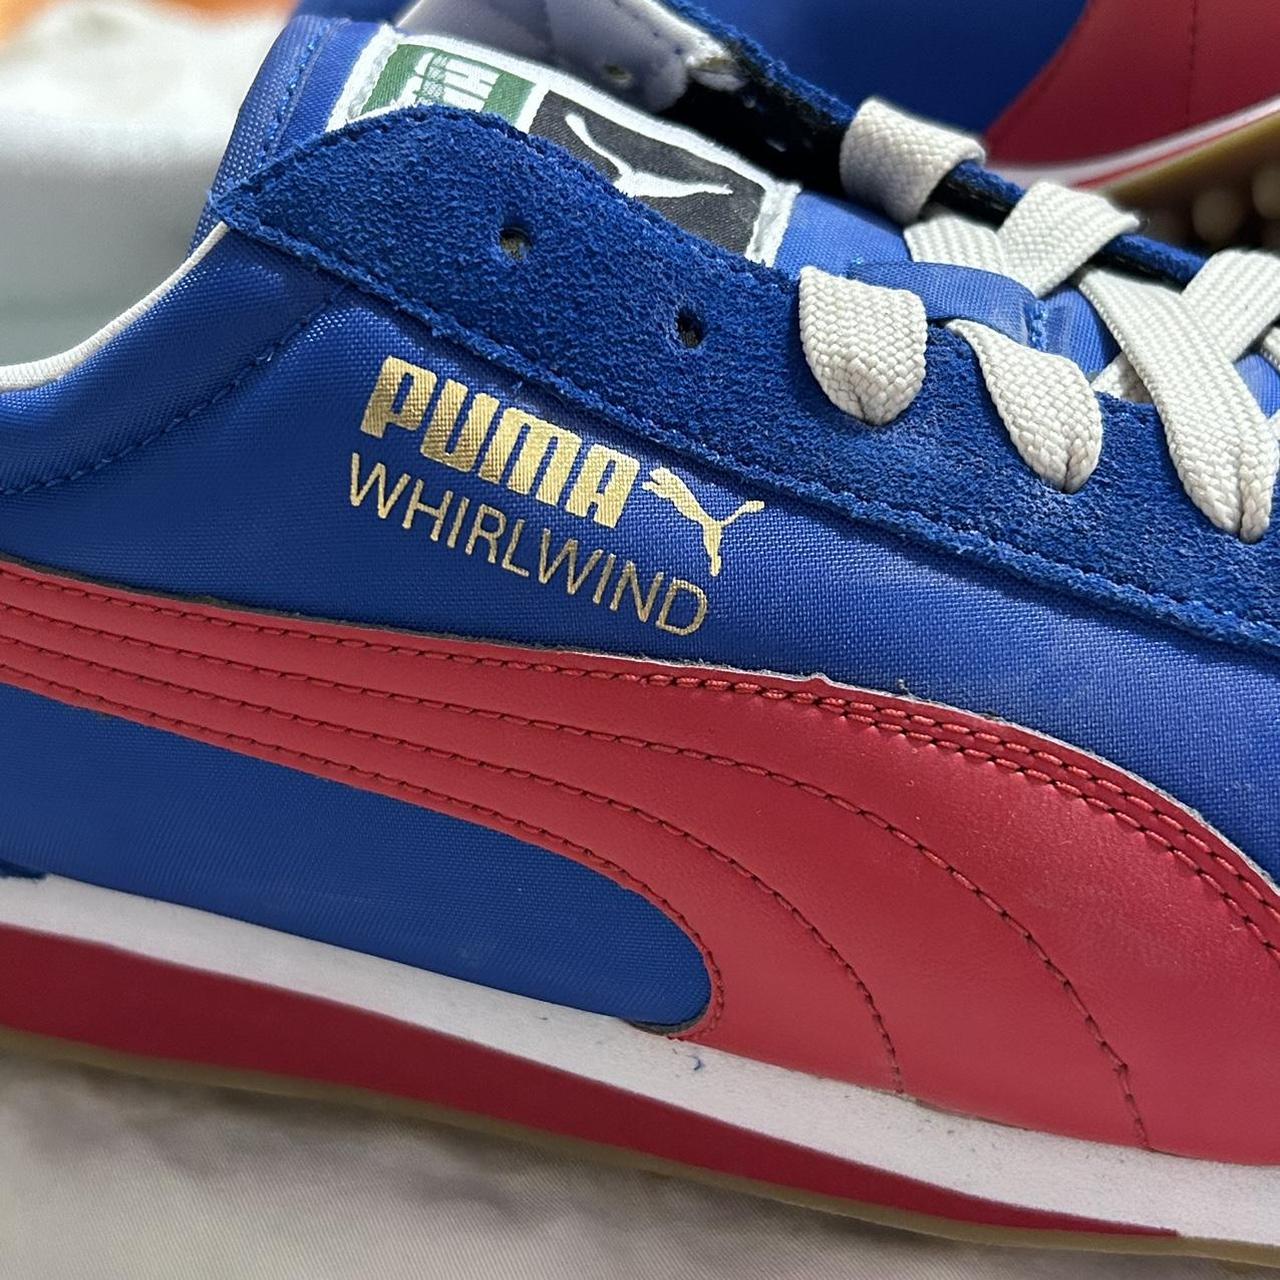 Puma Men's Blue and Red Trainers | Depop